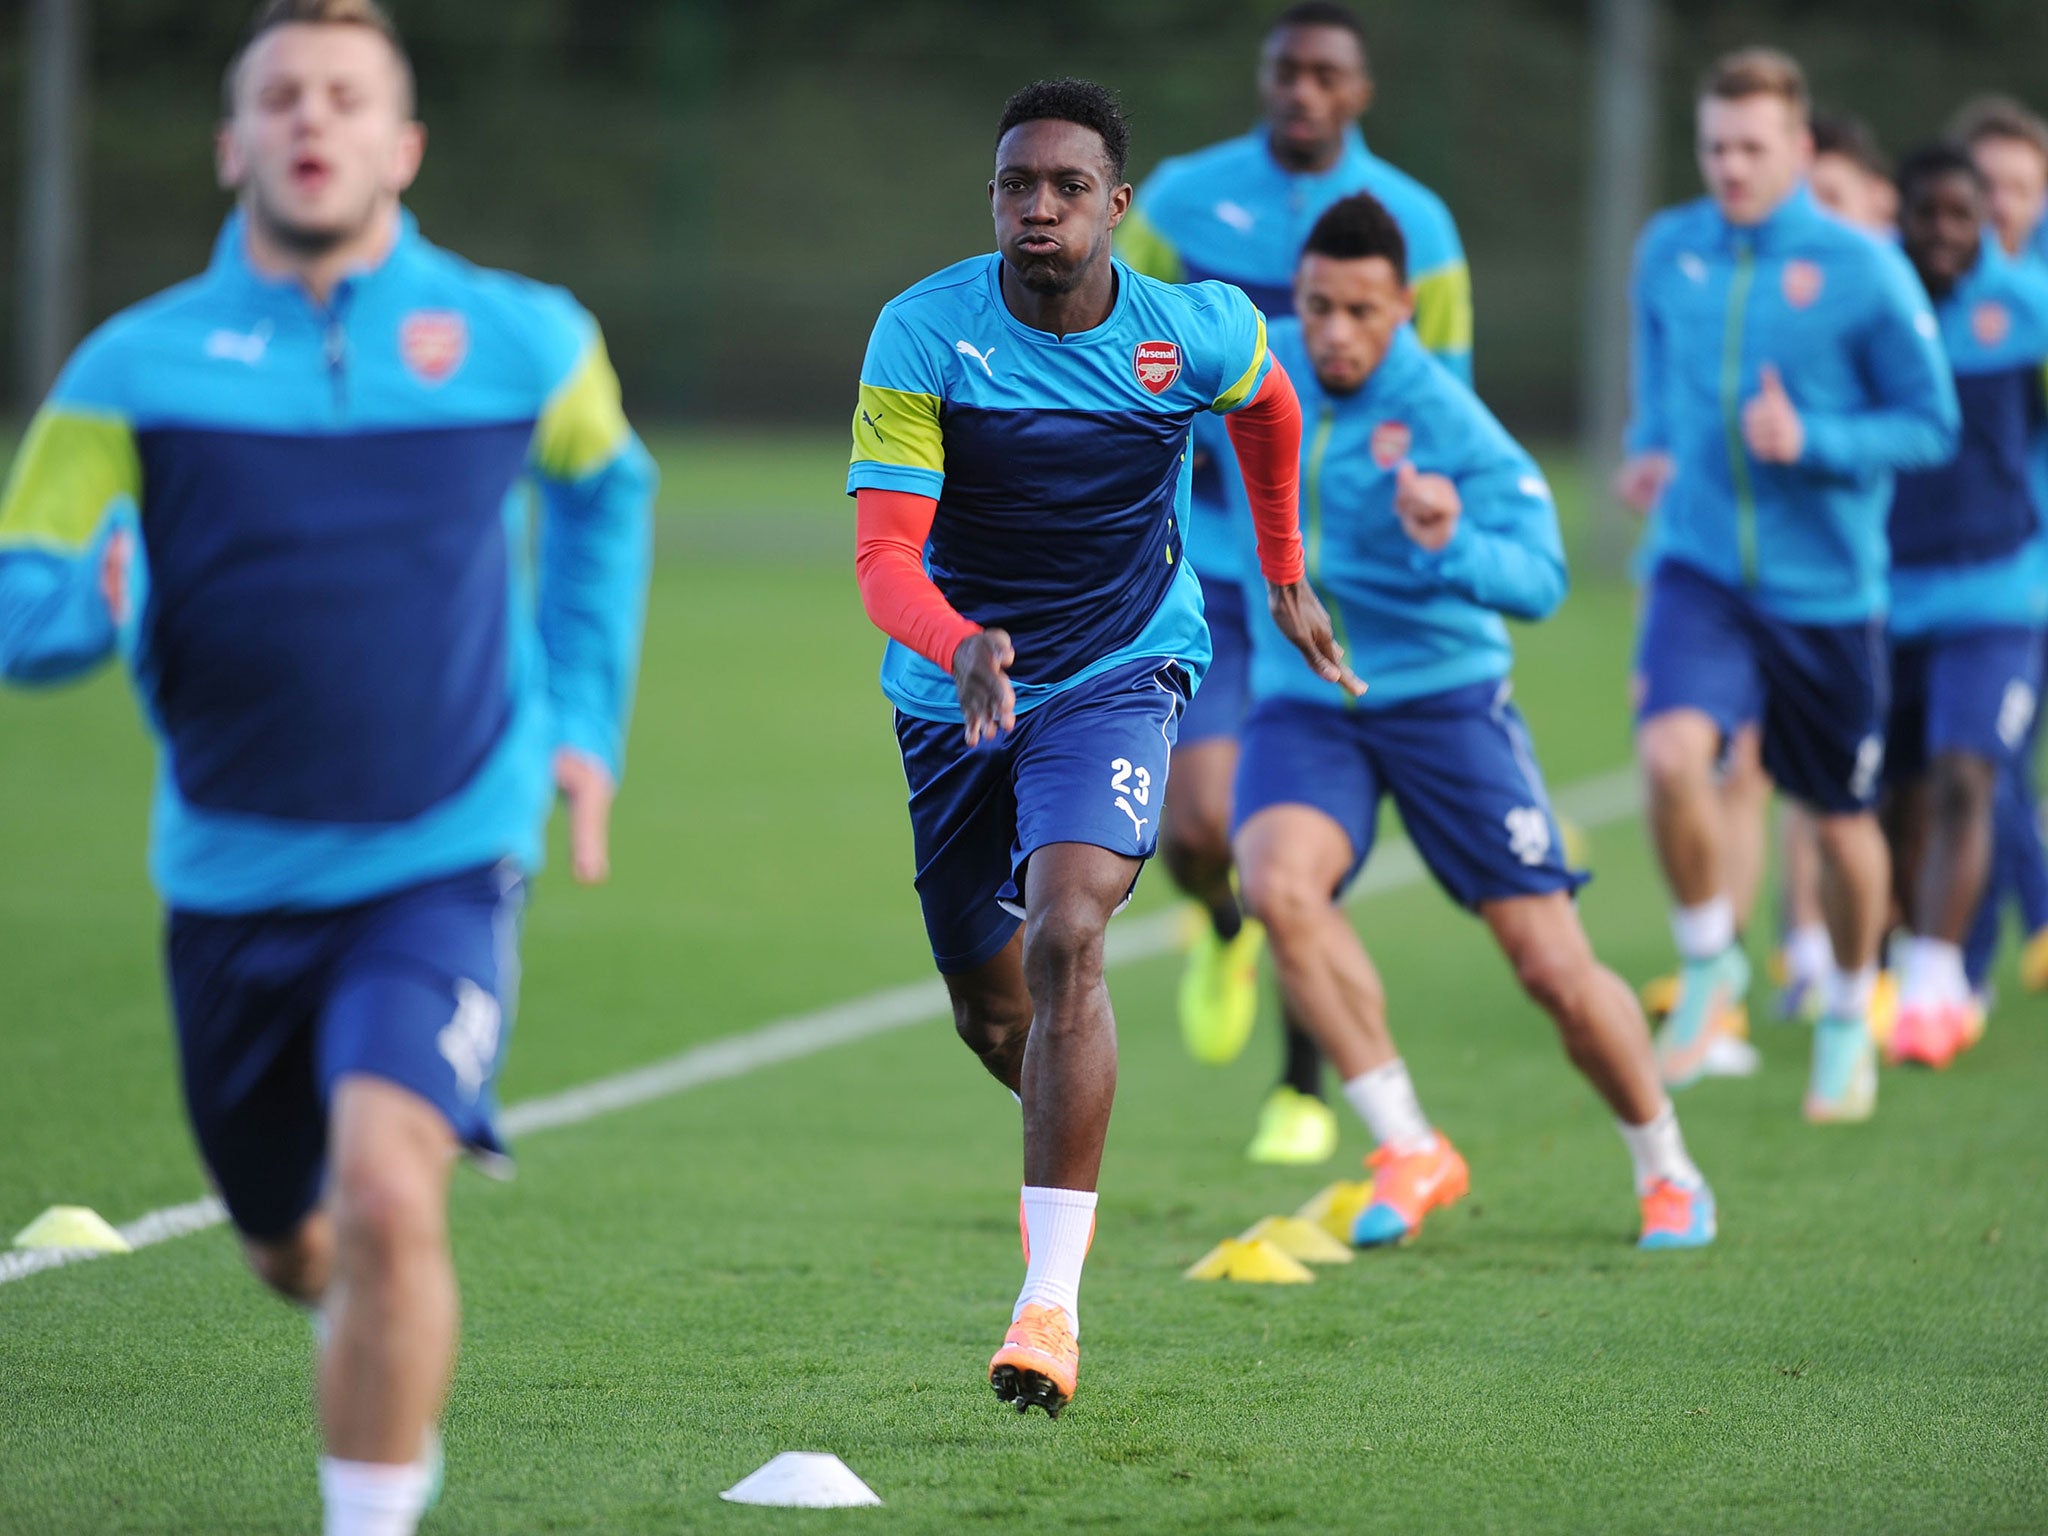 Danny Welbeck of Arsenal during a training session at London Colney on October 21, 2014 in St Albans, England.